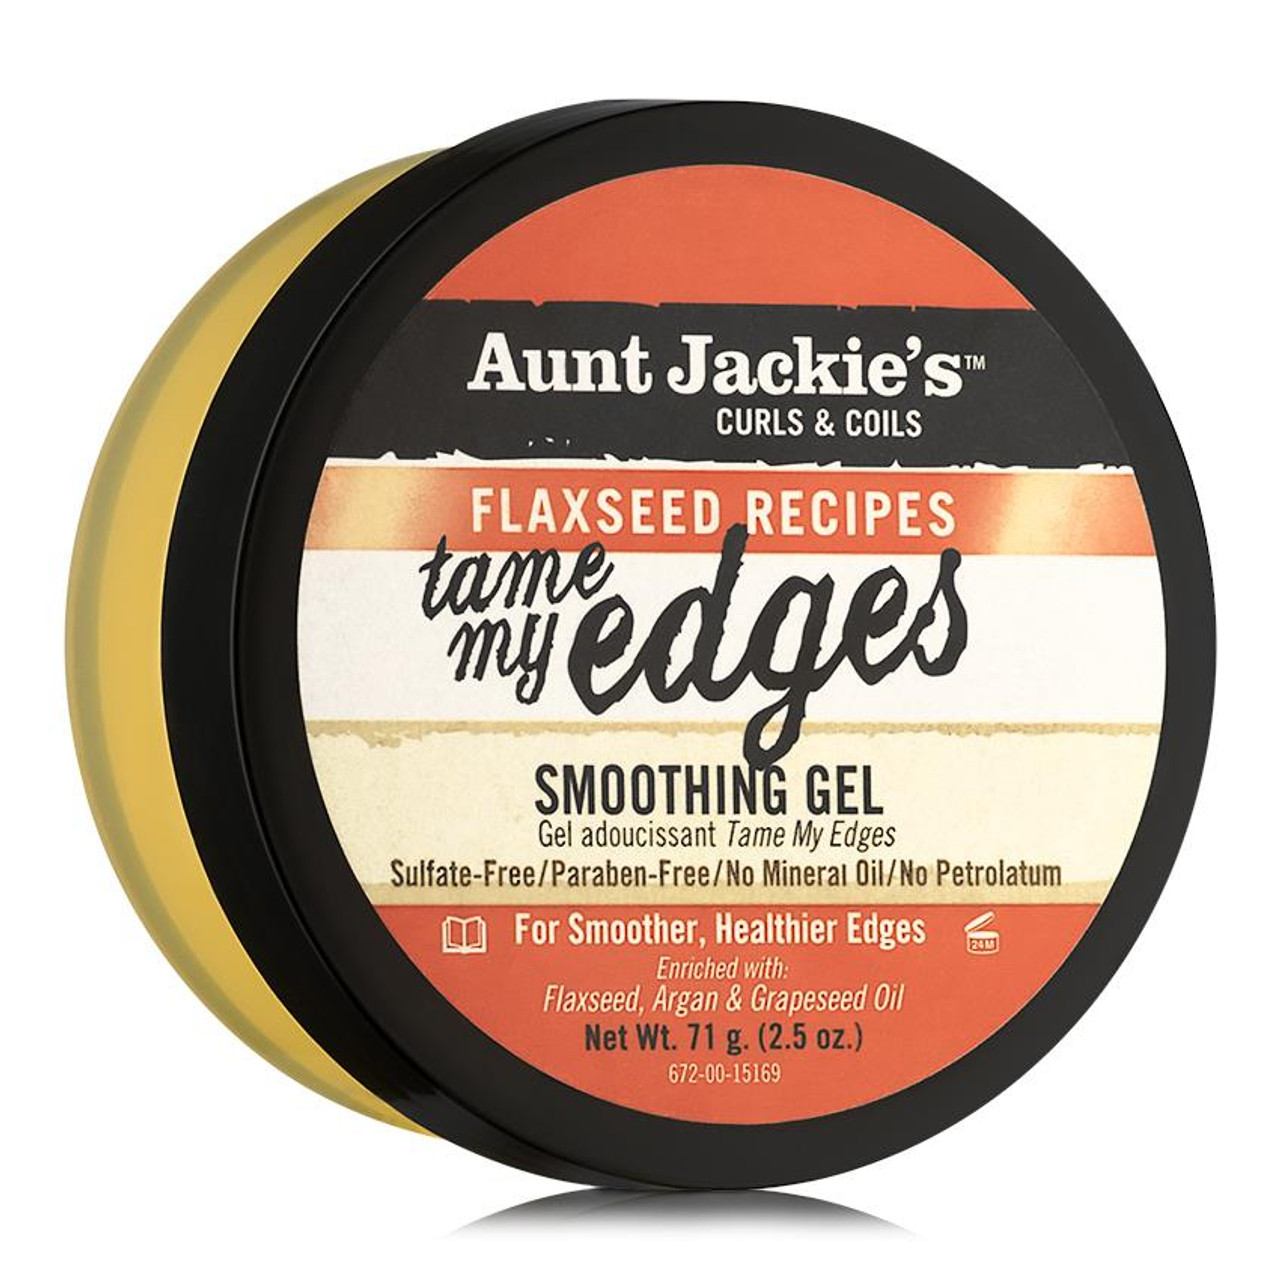 Aunt Jackie's Curls & Coils Flaxseed Recipes Tame My Edges Smoothing Gel  (2.5 oz.) - NaturallyCurly